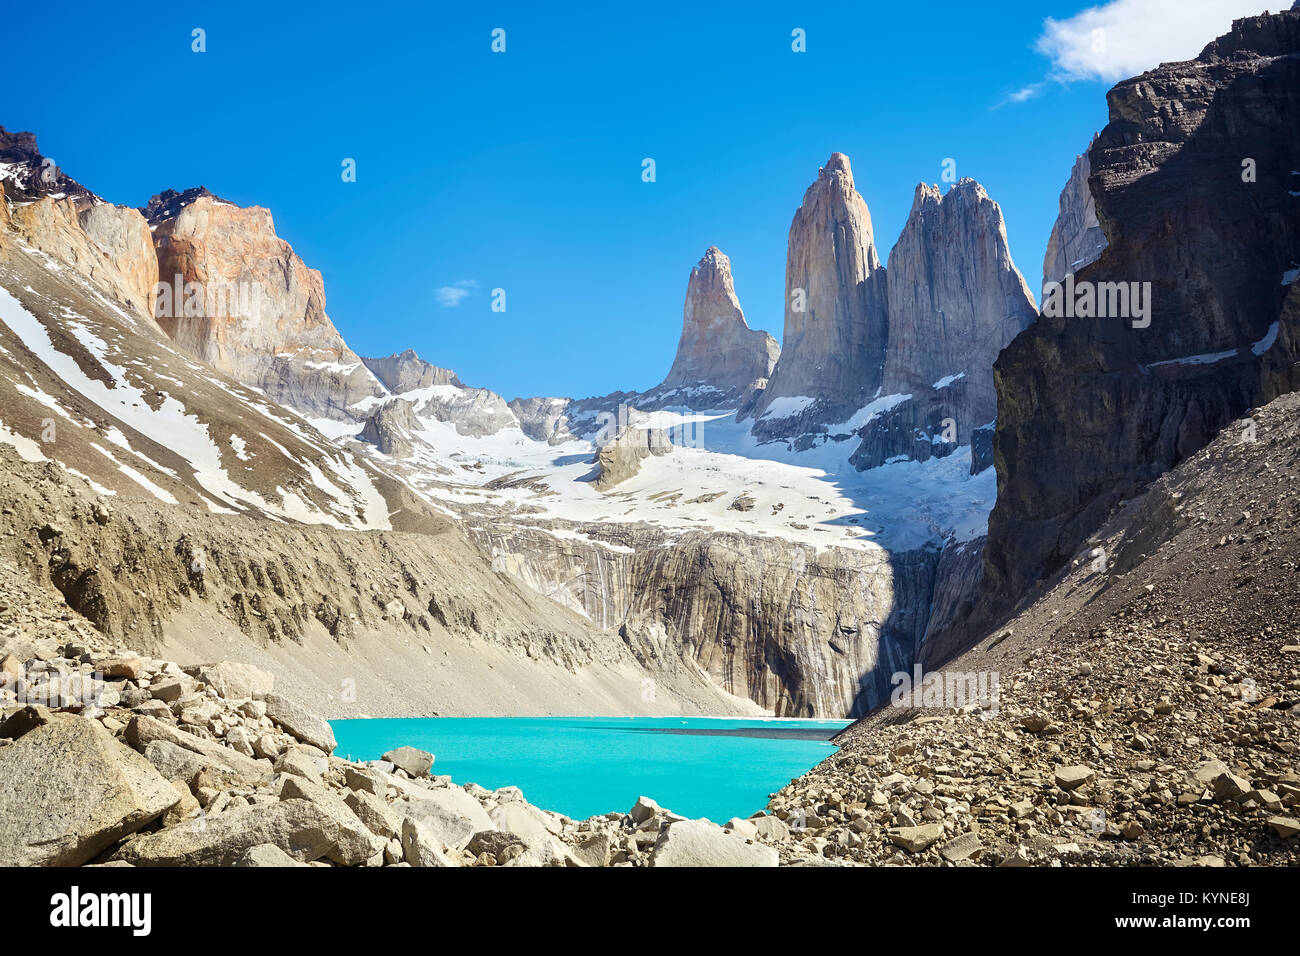 Torres del Paine National Park, Patagonia, Chile. Stock Photo